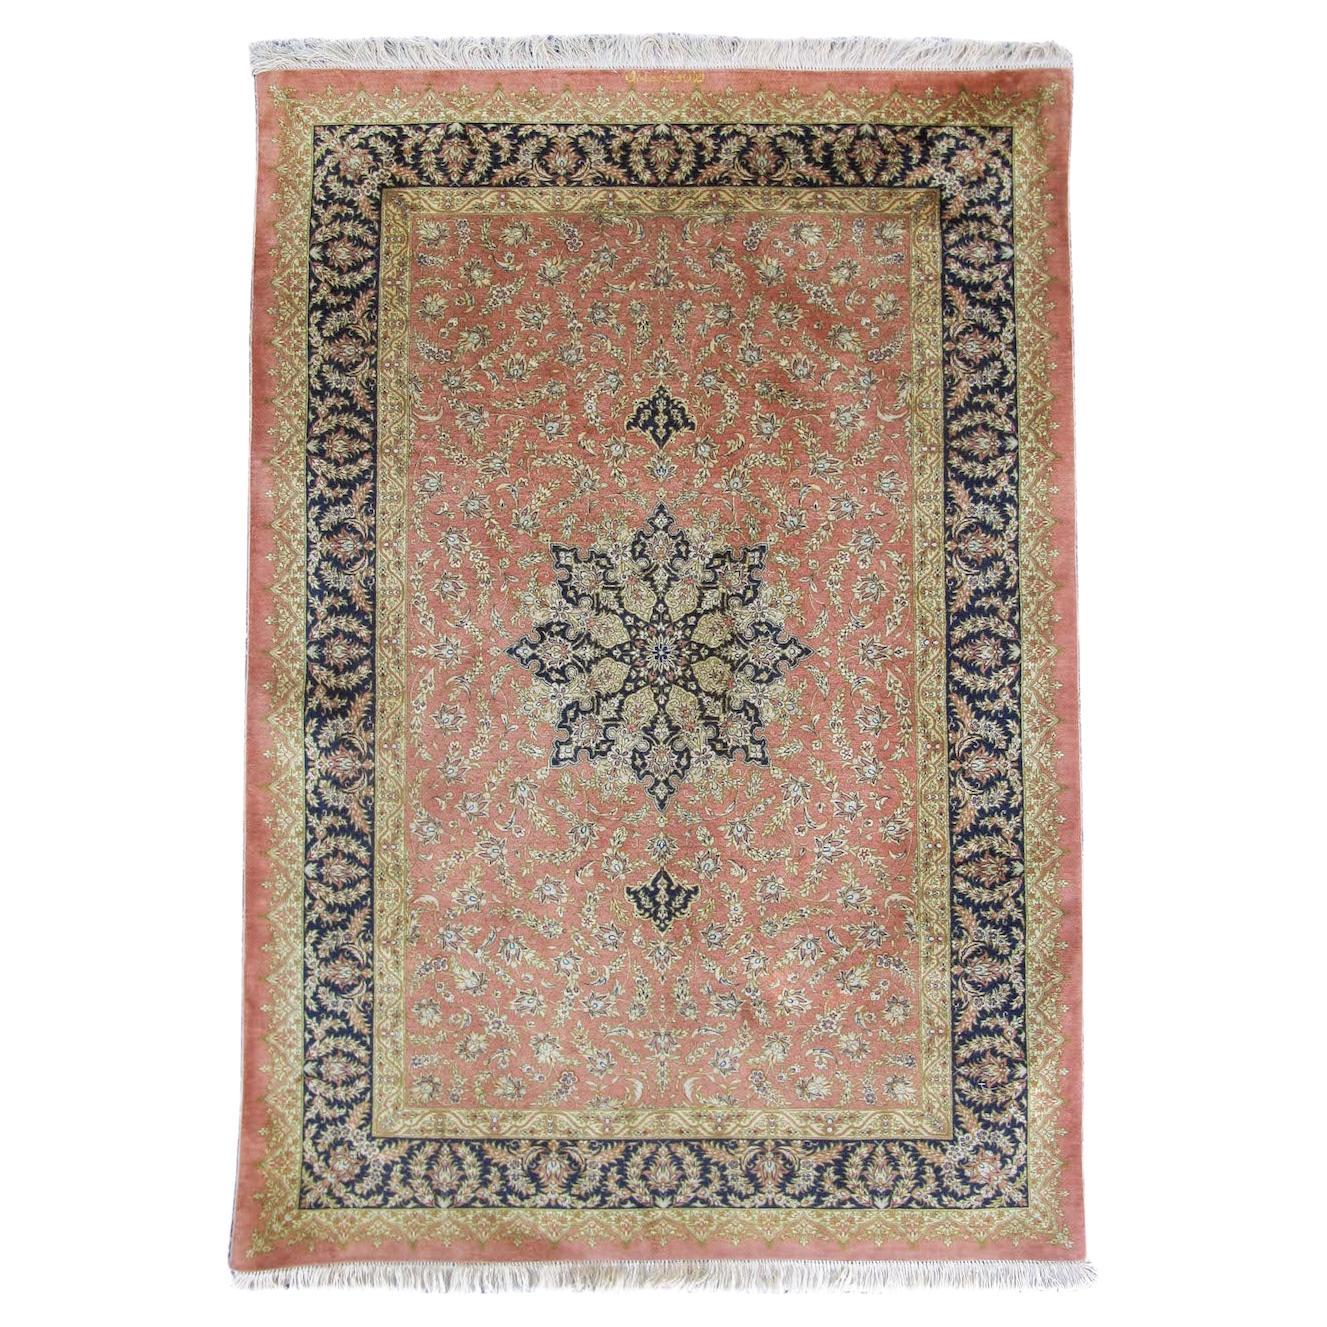 How can I tell if a Persian rug is silk?